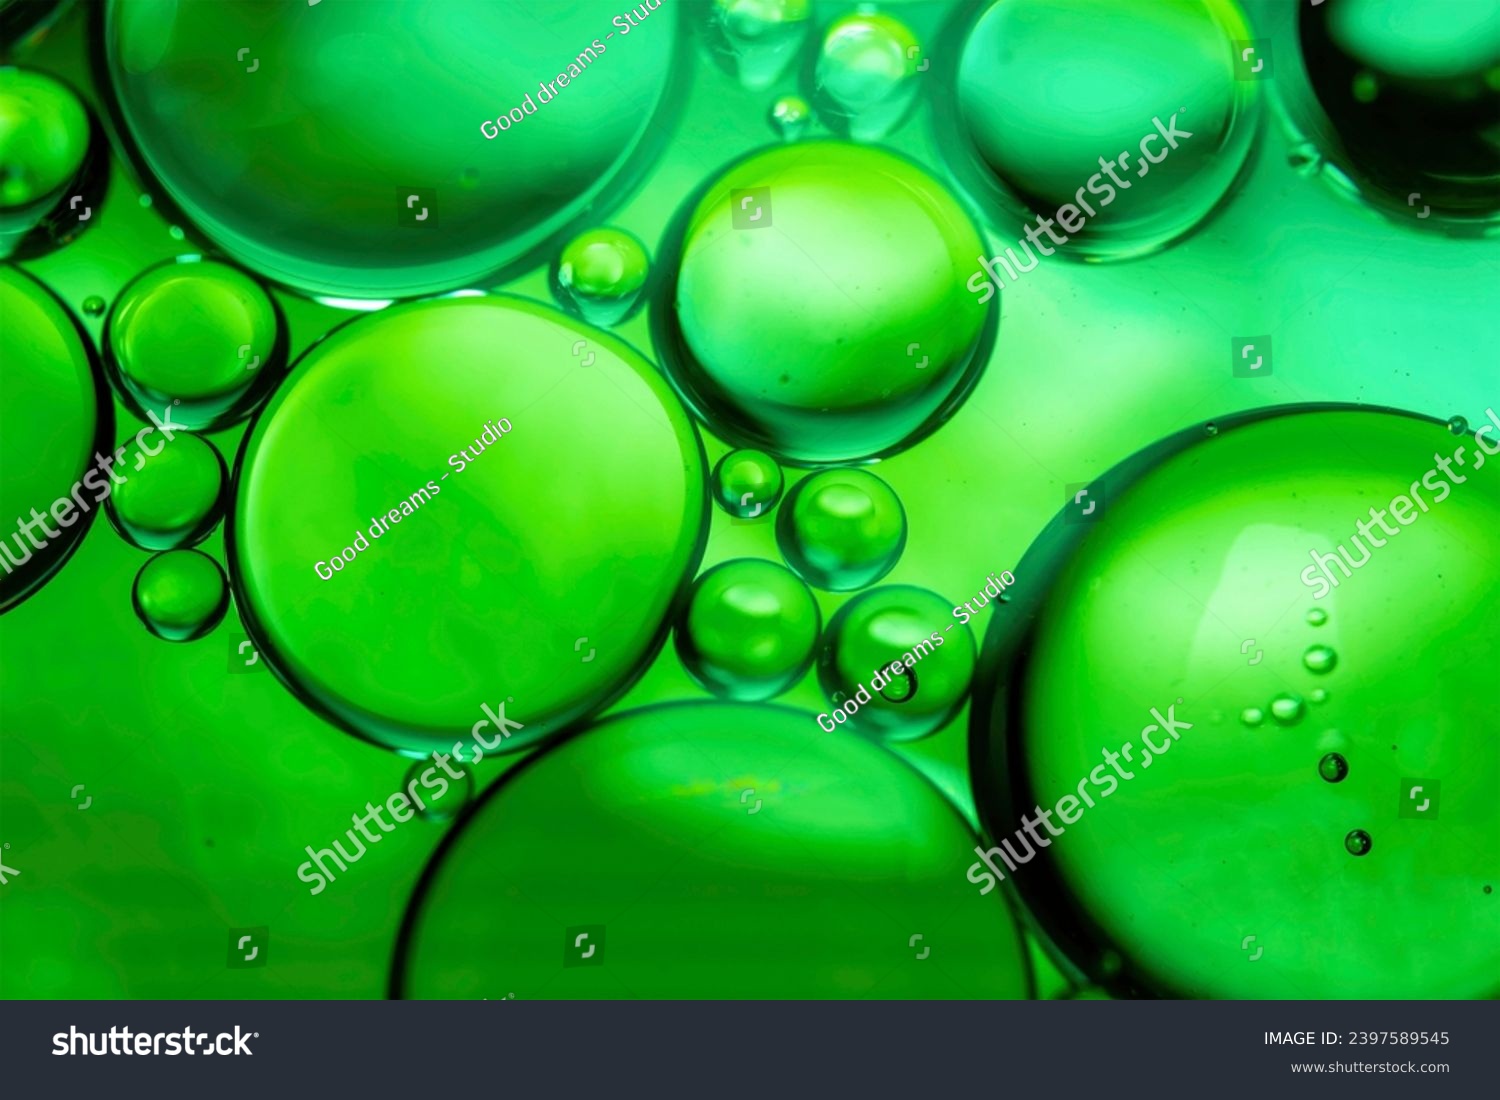 Green drops of oil or serum texture background. Abstract green fluid with bubbles	
 #2397589545